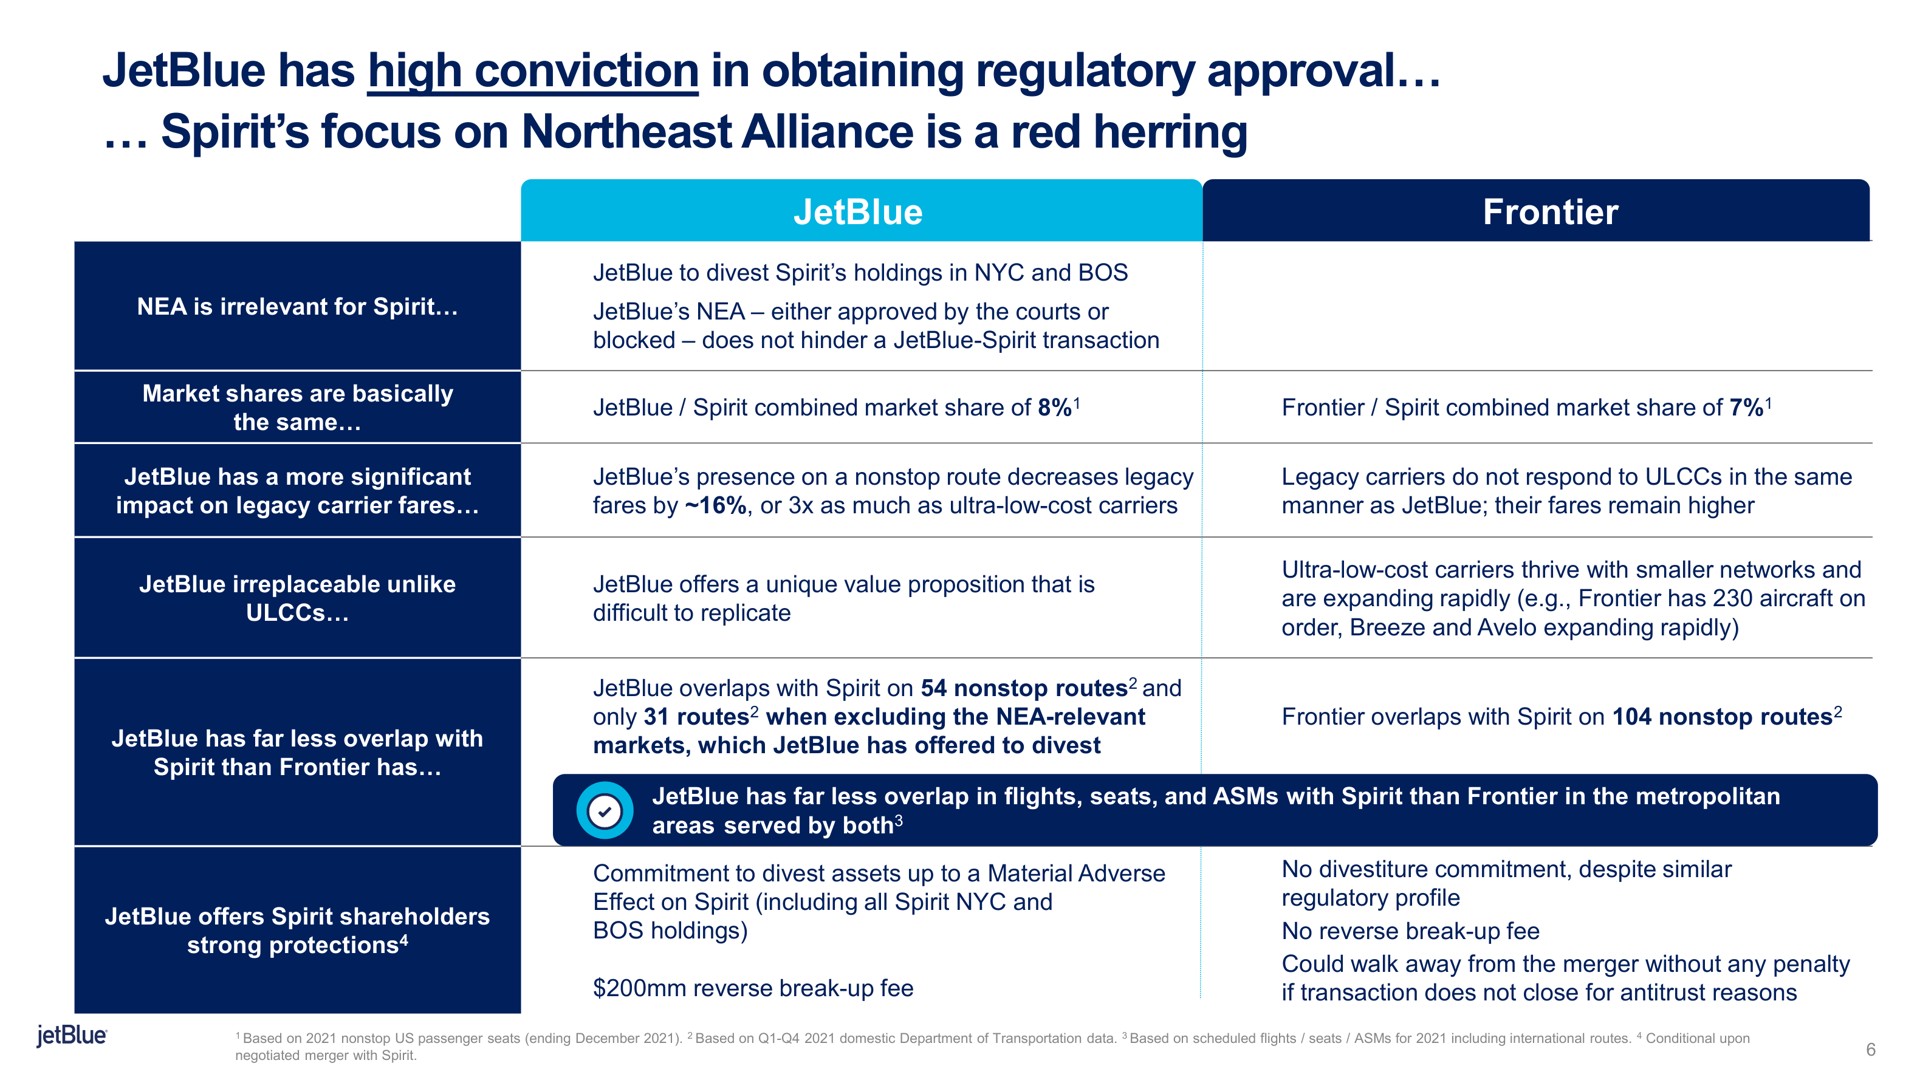 has high conviction in obtaining regulatory approval spirit focus on northeast alliance is a red herring | jetBlue